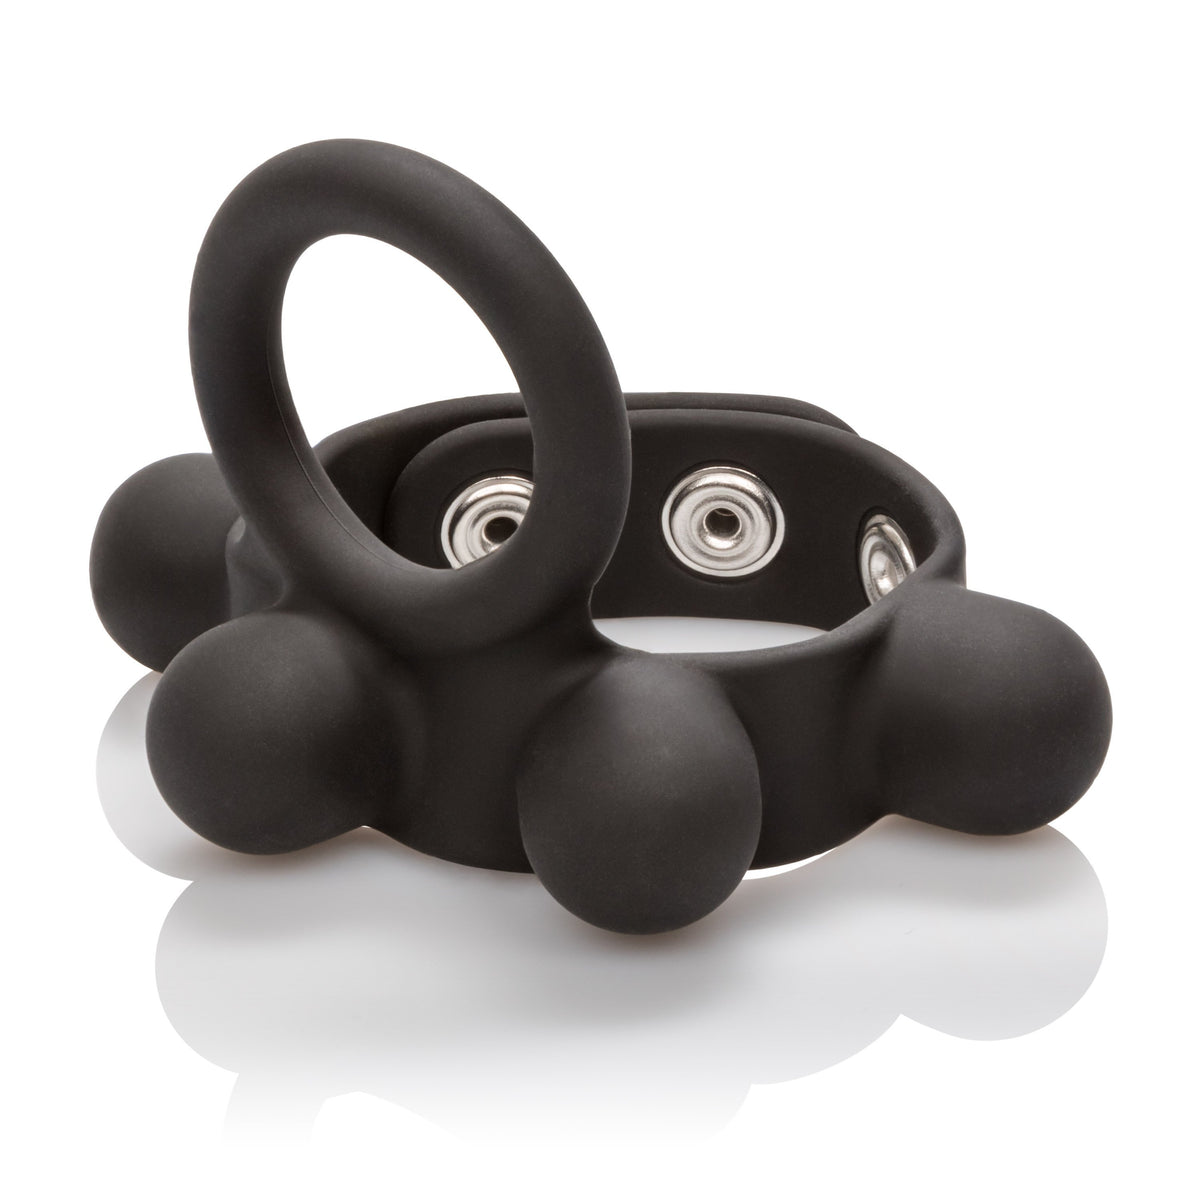 California Exotics - Medium Weighted C Ring Ball Stretcher Cock Ring (Black)    Silicone Cock Ring (Non Vibration)